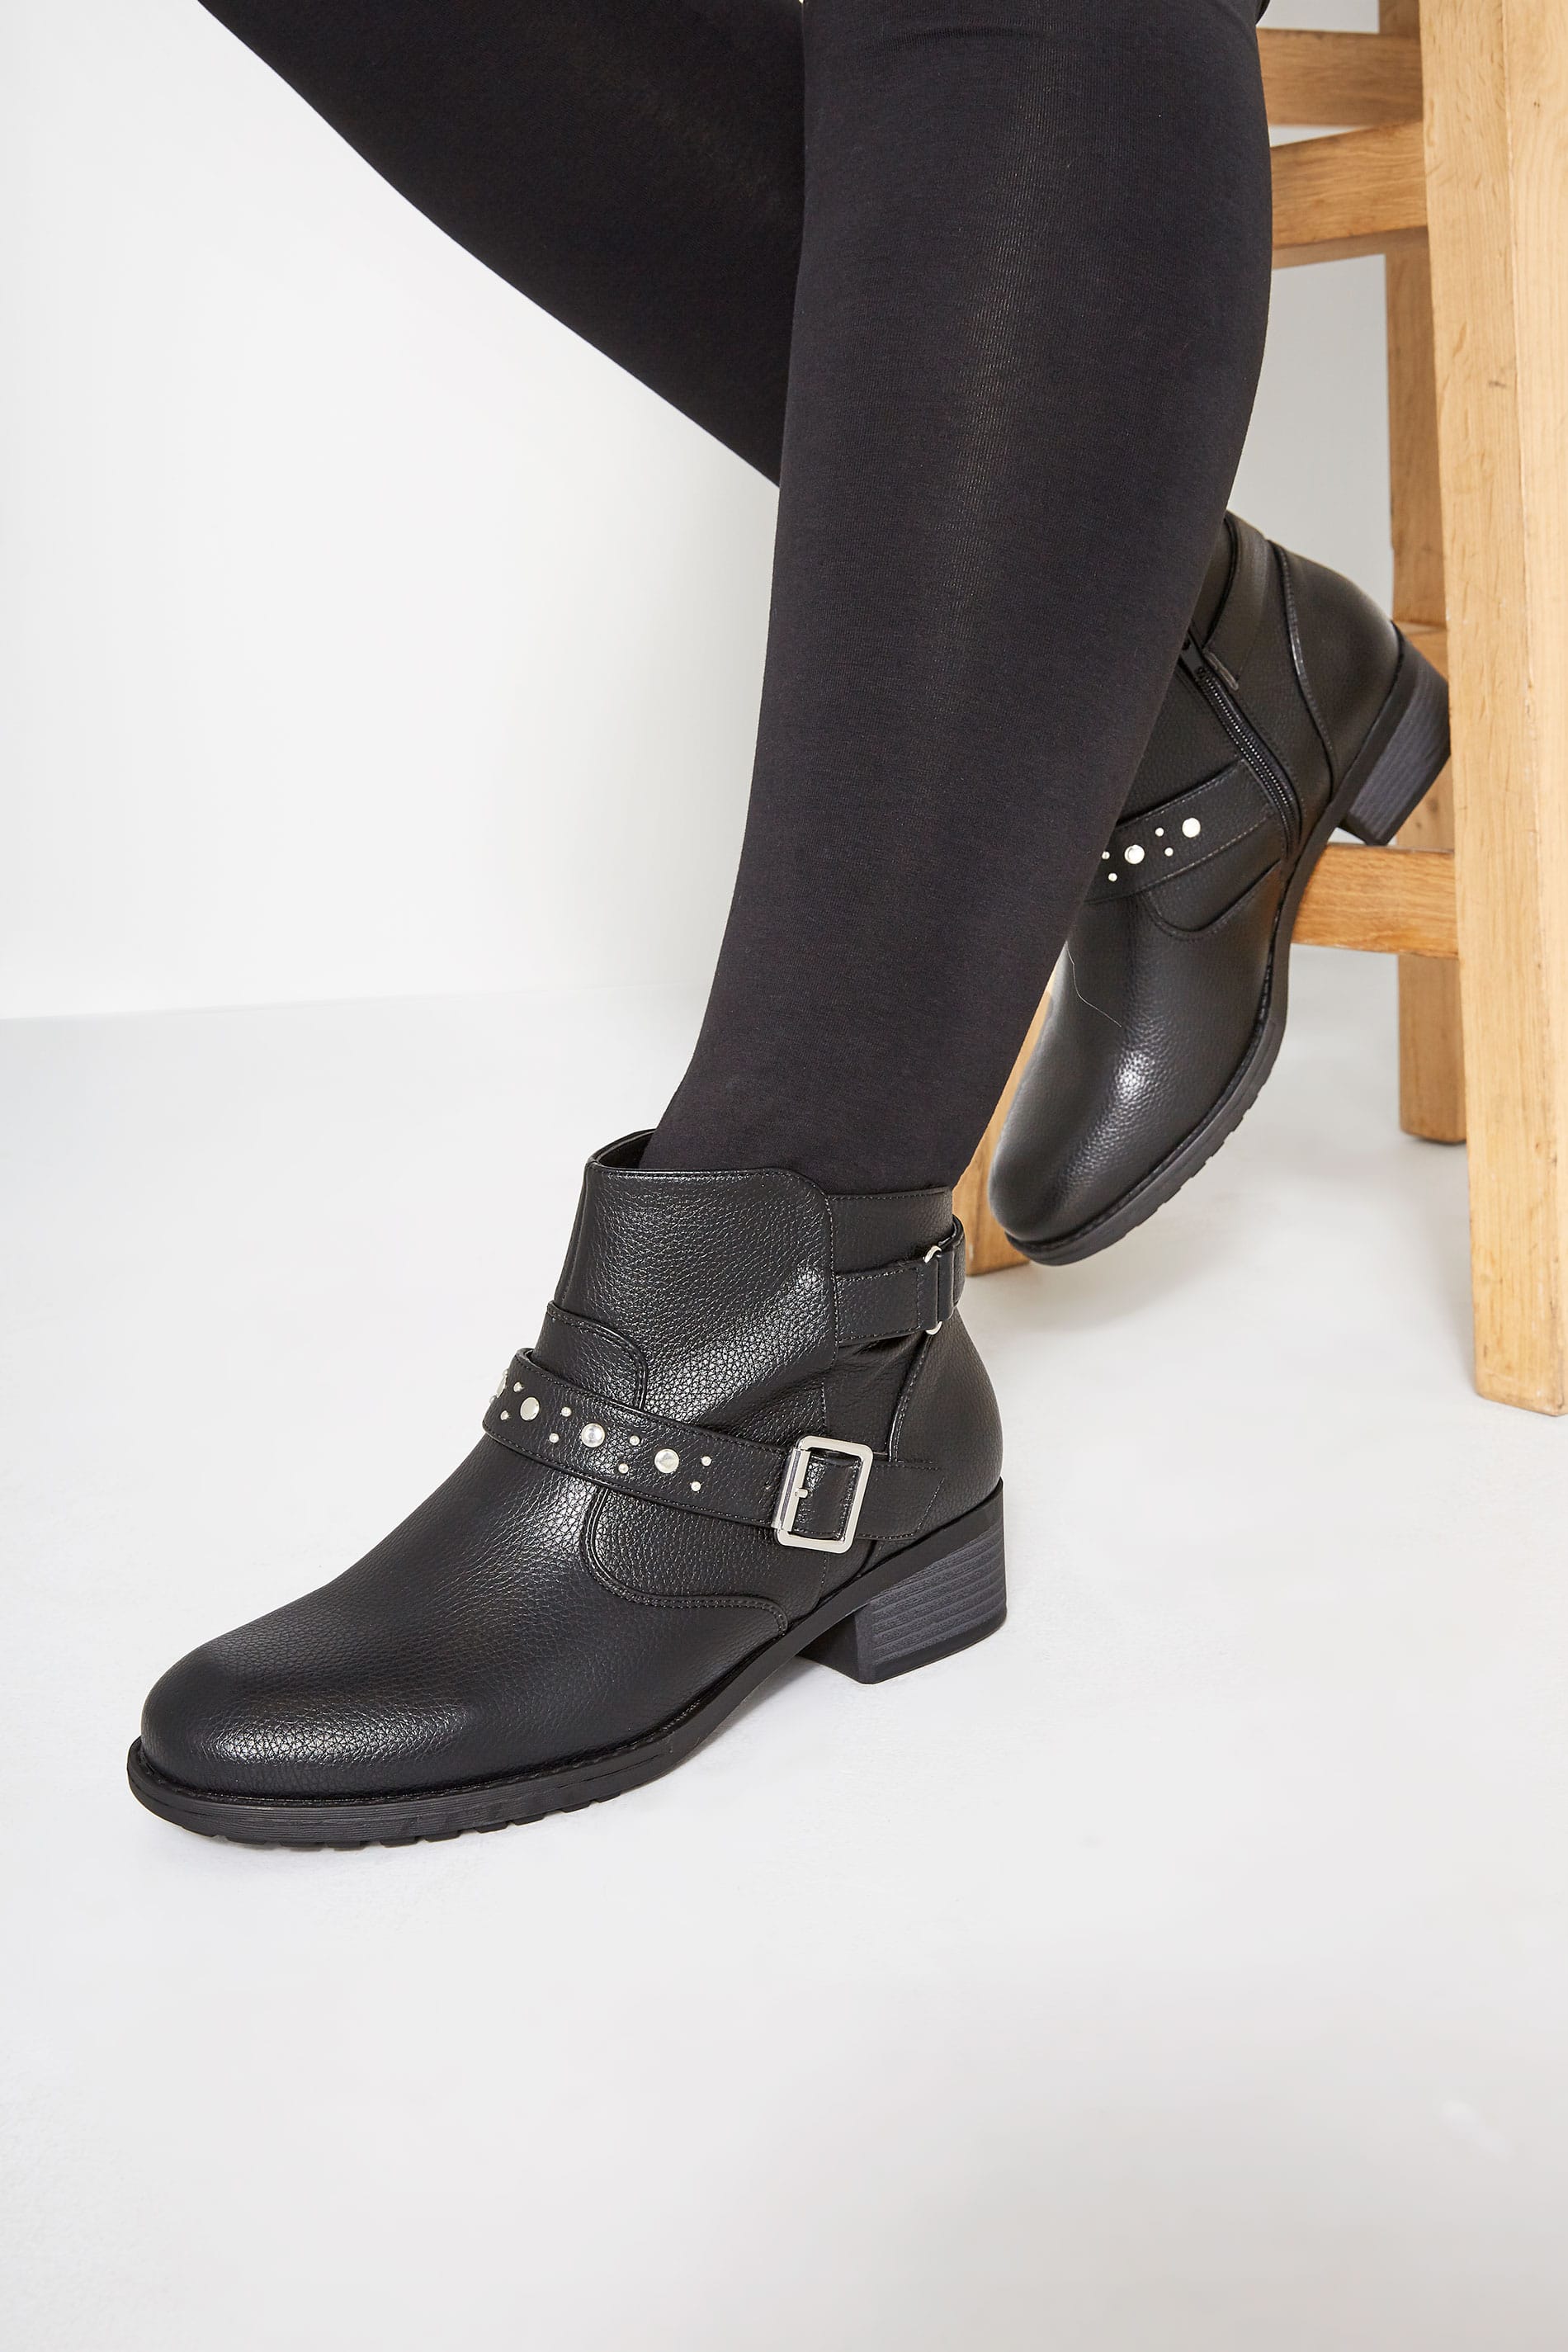 ankle boots with buckles and studs